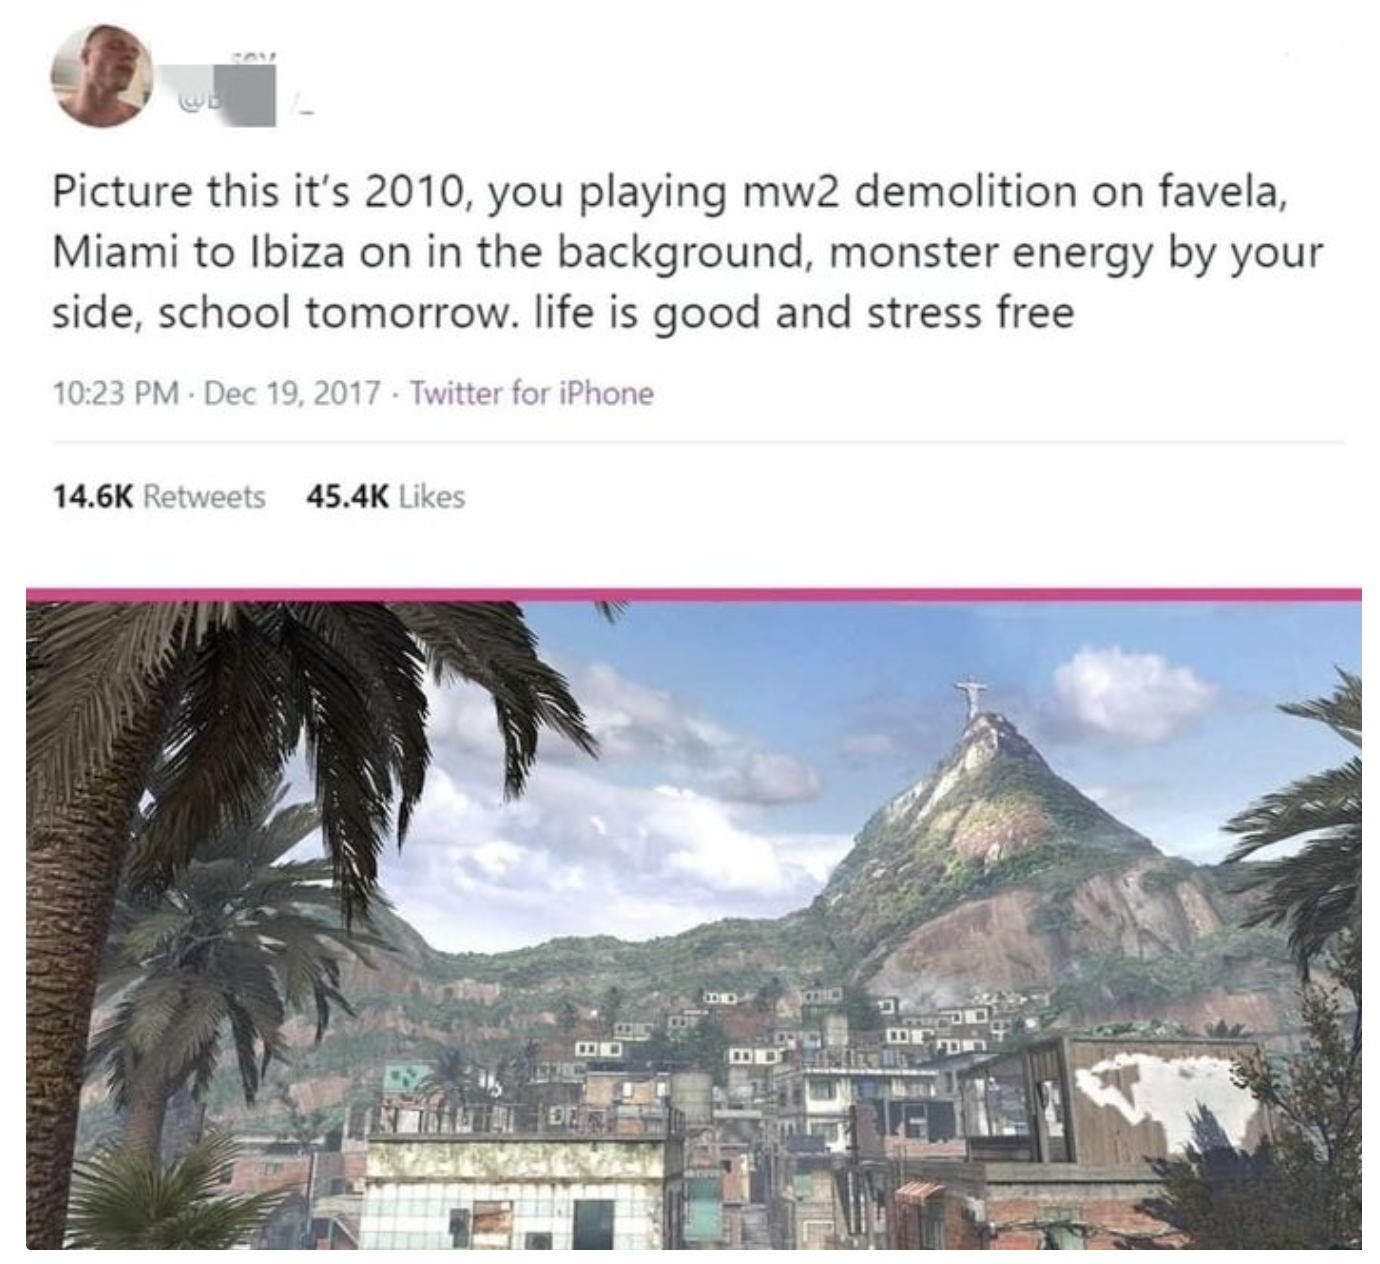 funny gaming memes - tourism - Picture this it's 2010, you playing mw2 demolition on favela, Miami to Ibiza on in the background, monster energy by your side, school tomorrow. life is good and stress free Twitter for iPhone